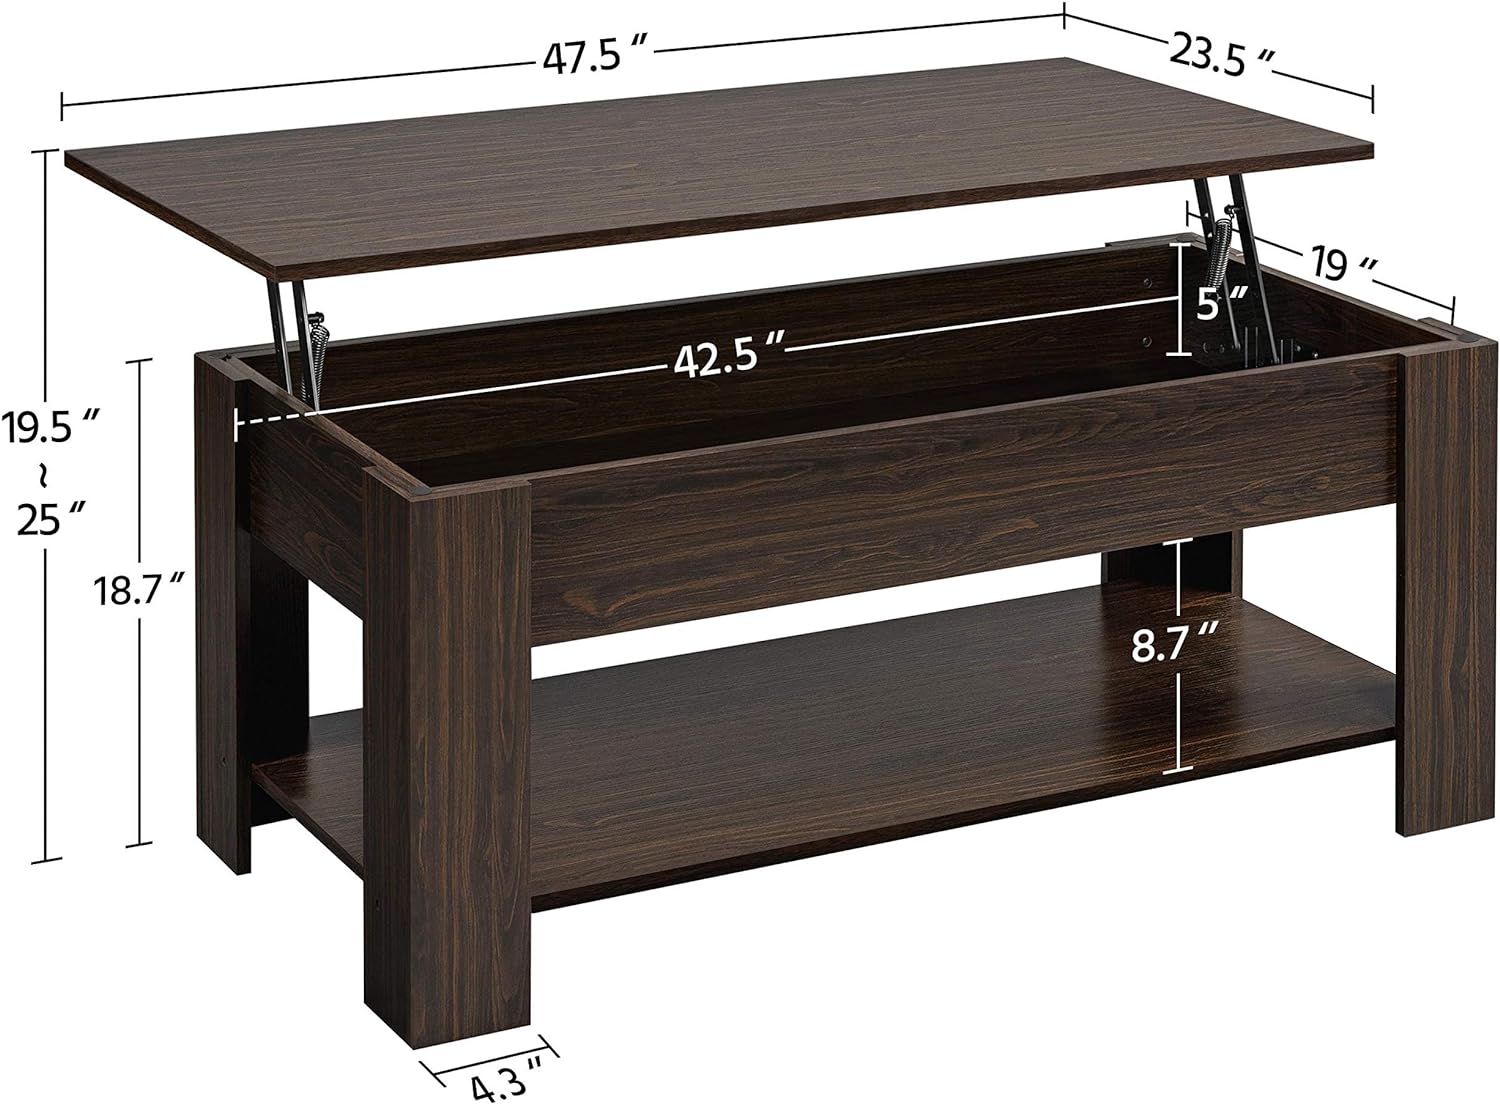 Creative and Stylish Design Lift Top Coffee Table, Central Table with Storage Compartment